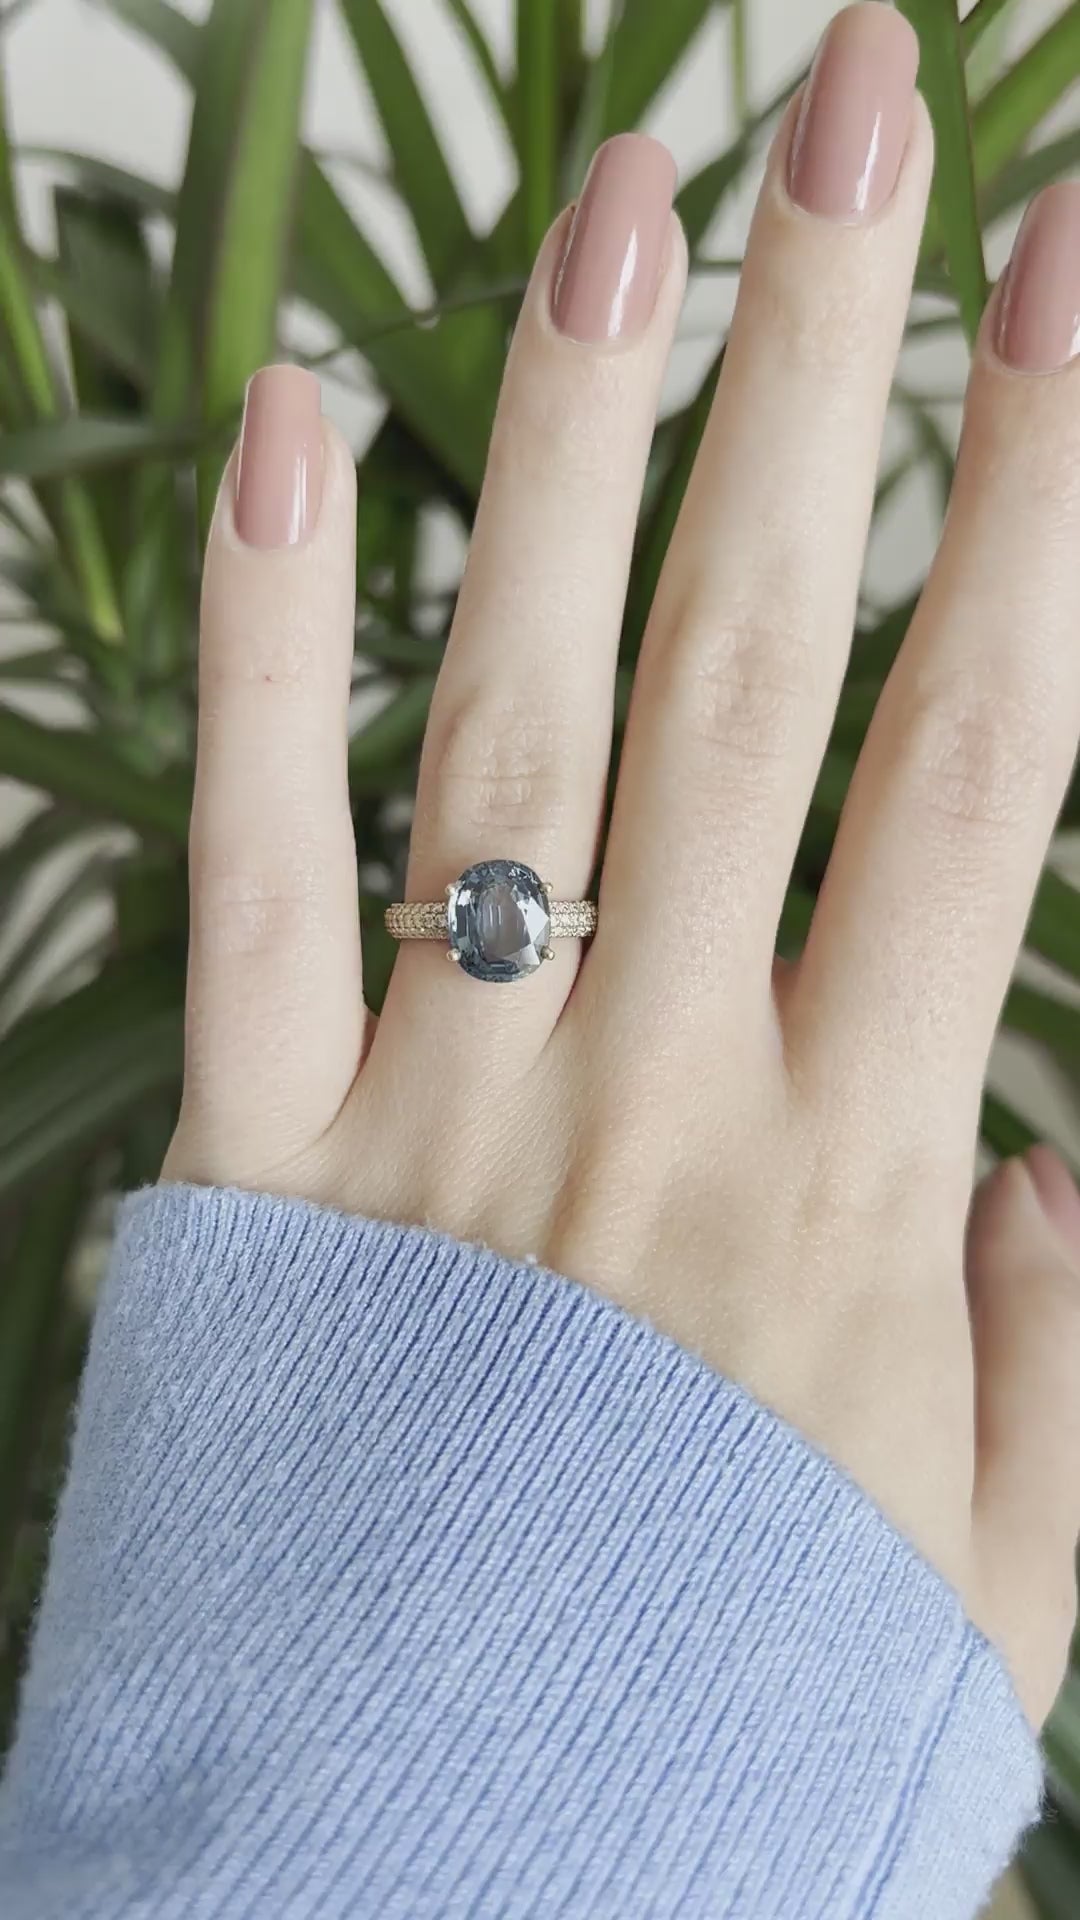 Blue oval-shaped cushion sapphire ring video